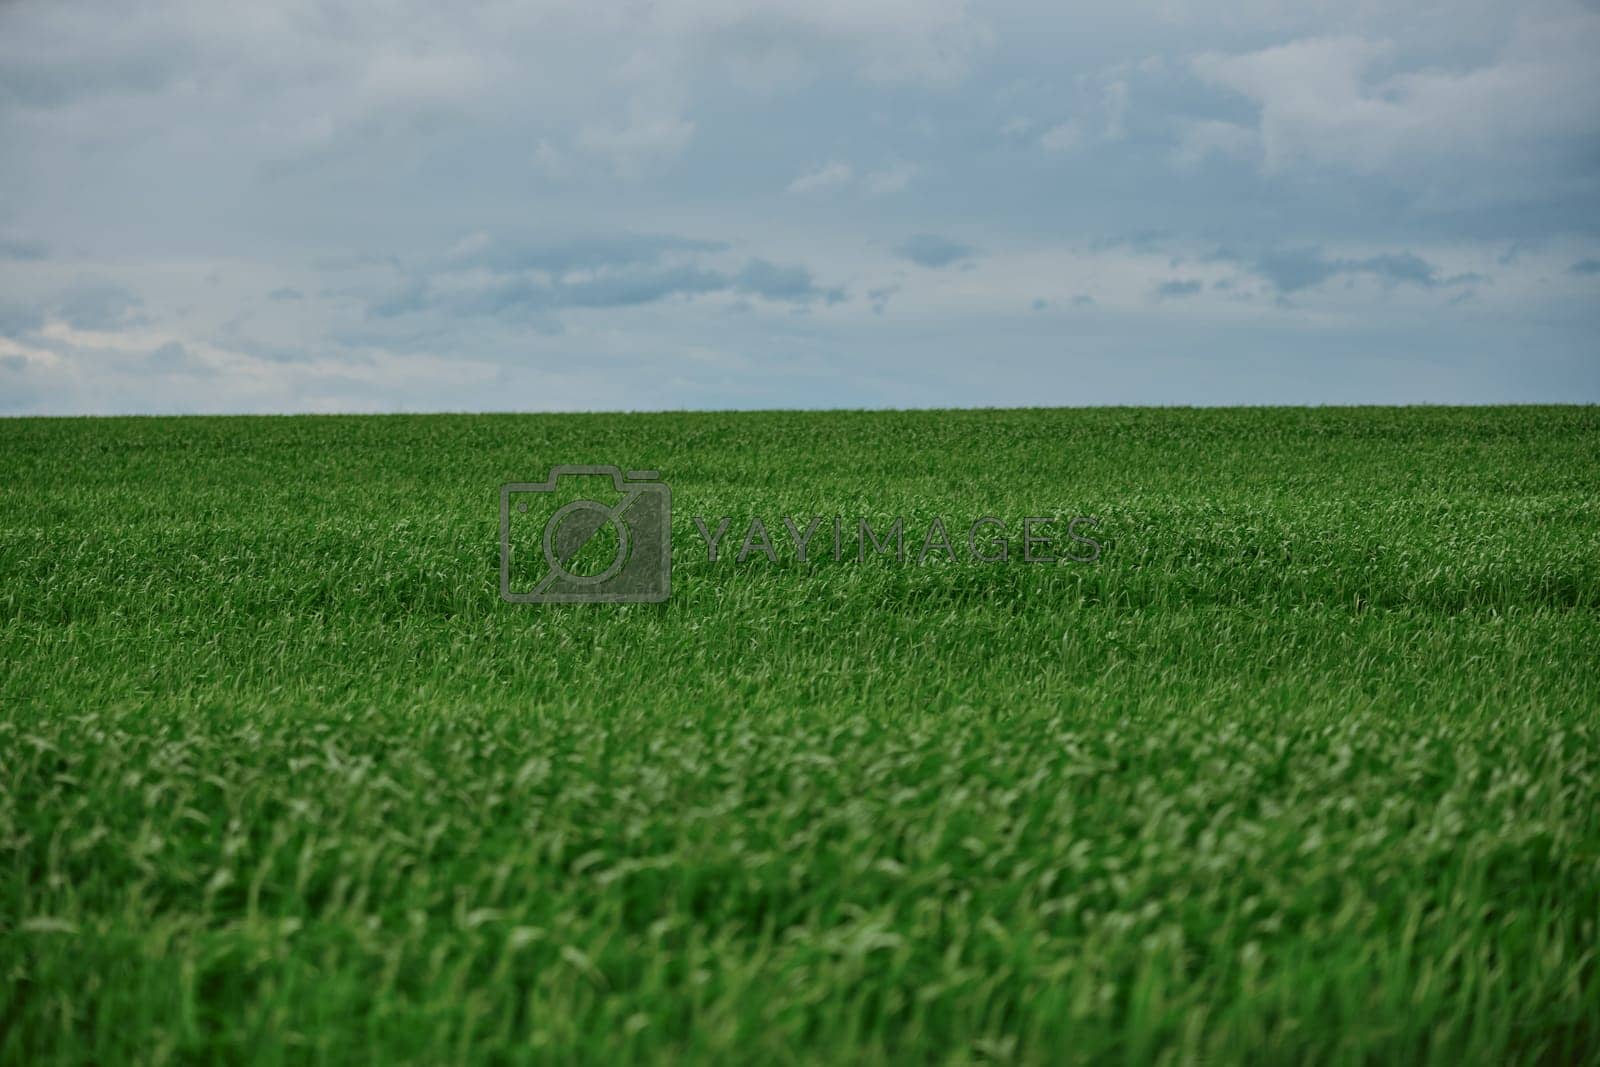 Royalty free image of green field with tall grass in rainy weather with cloudy sky by Vichizh